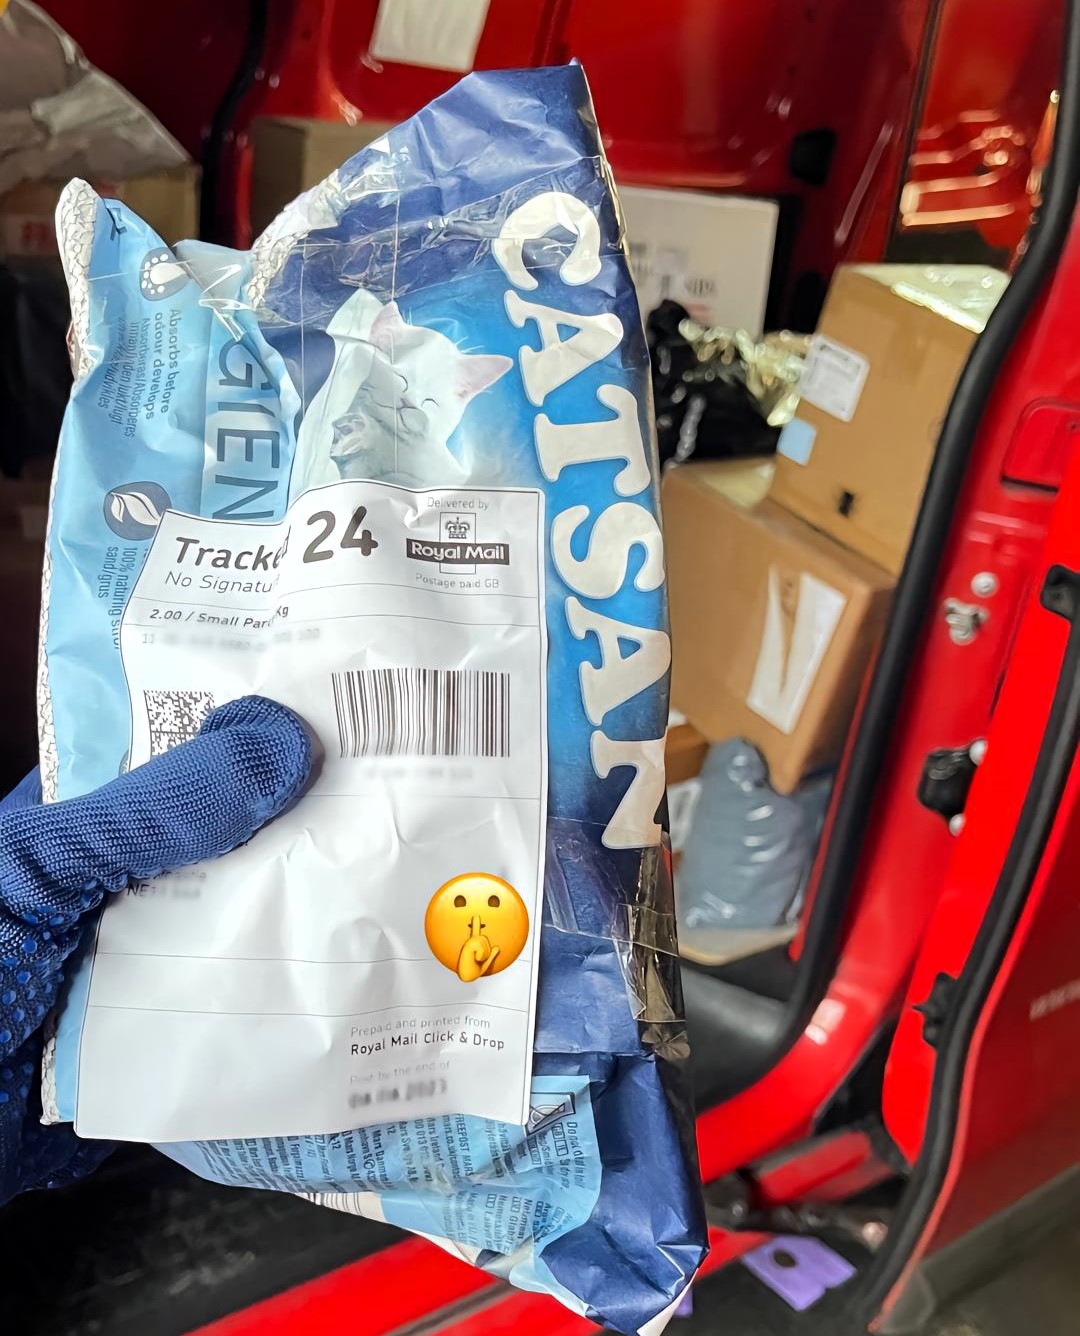 Royal Mail customers get creative with odd packaging choices during the cost-of-living crisis, using items like cat litter bags and egg cartons. While amusing, the company ensures safety and security for all parcels. Netizens find the creativity amusing, with some suggesting simpler alternatives.